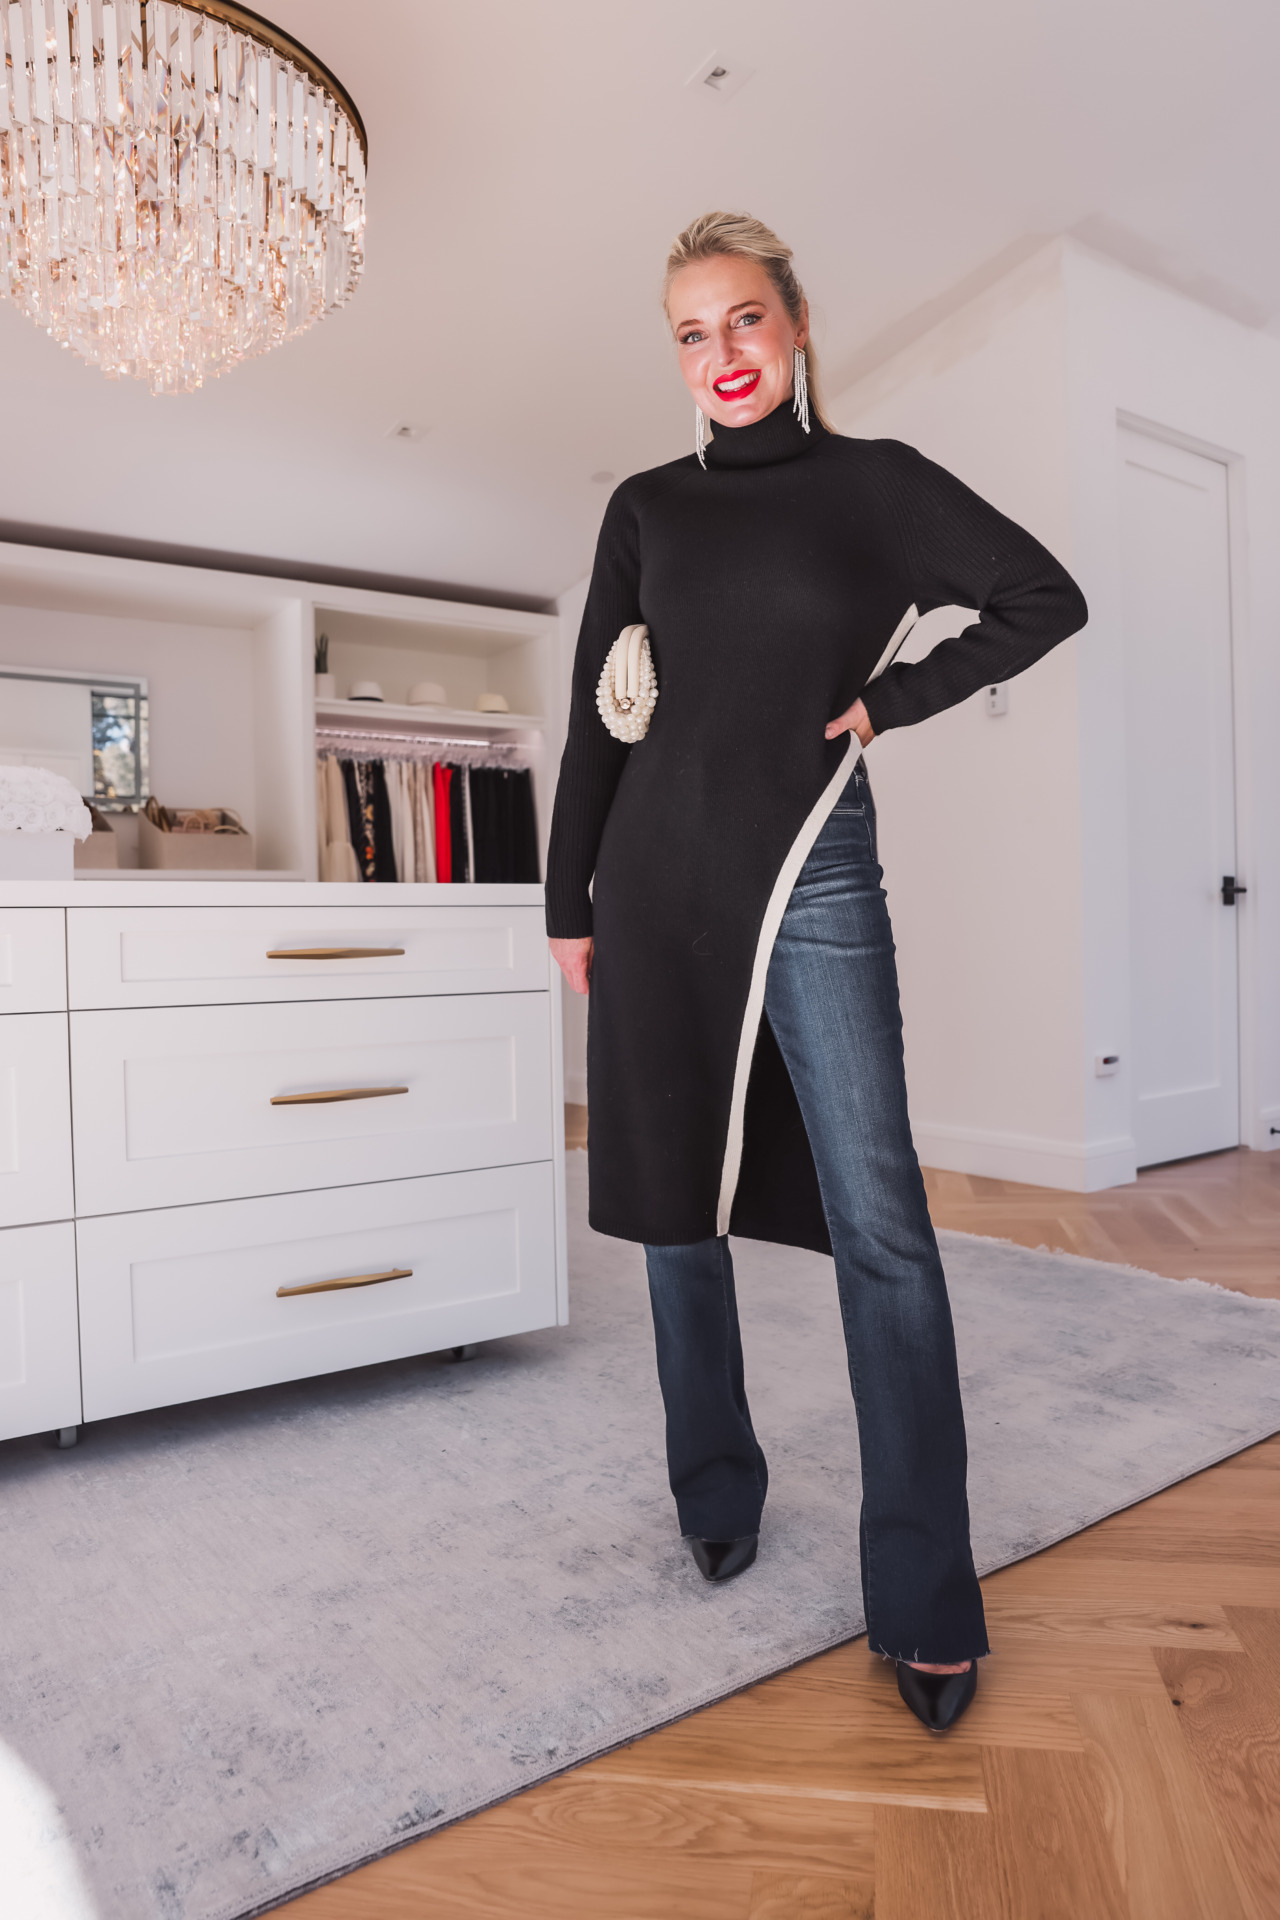 holiday tops you can wear with jeans, How To Dress Up Jeans For A Holiday Party